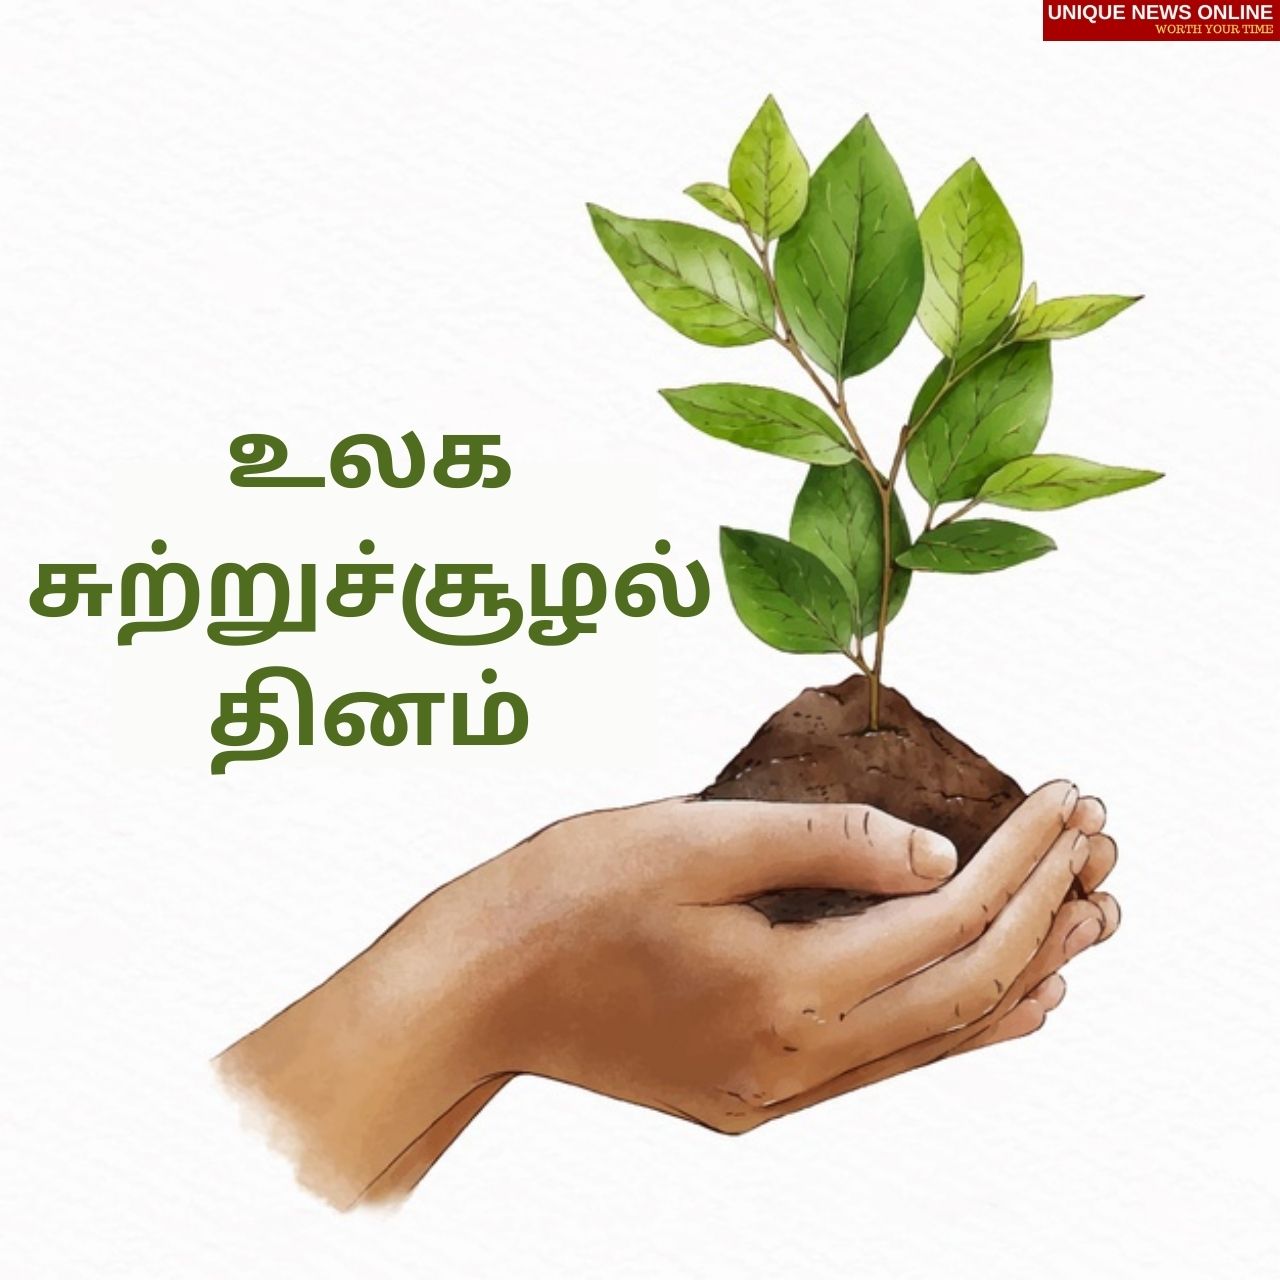 World Environment Day 2021: Tamil and Kannada Quotes, Wishes, Status, Greetings, and Messages to Share